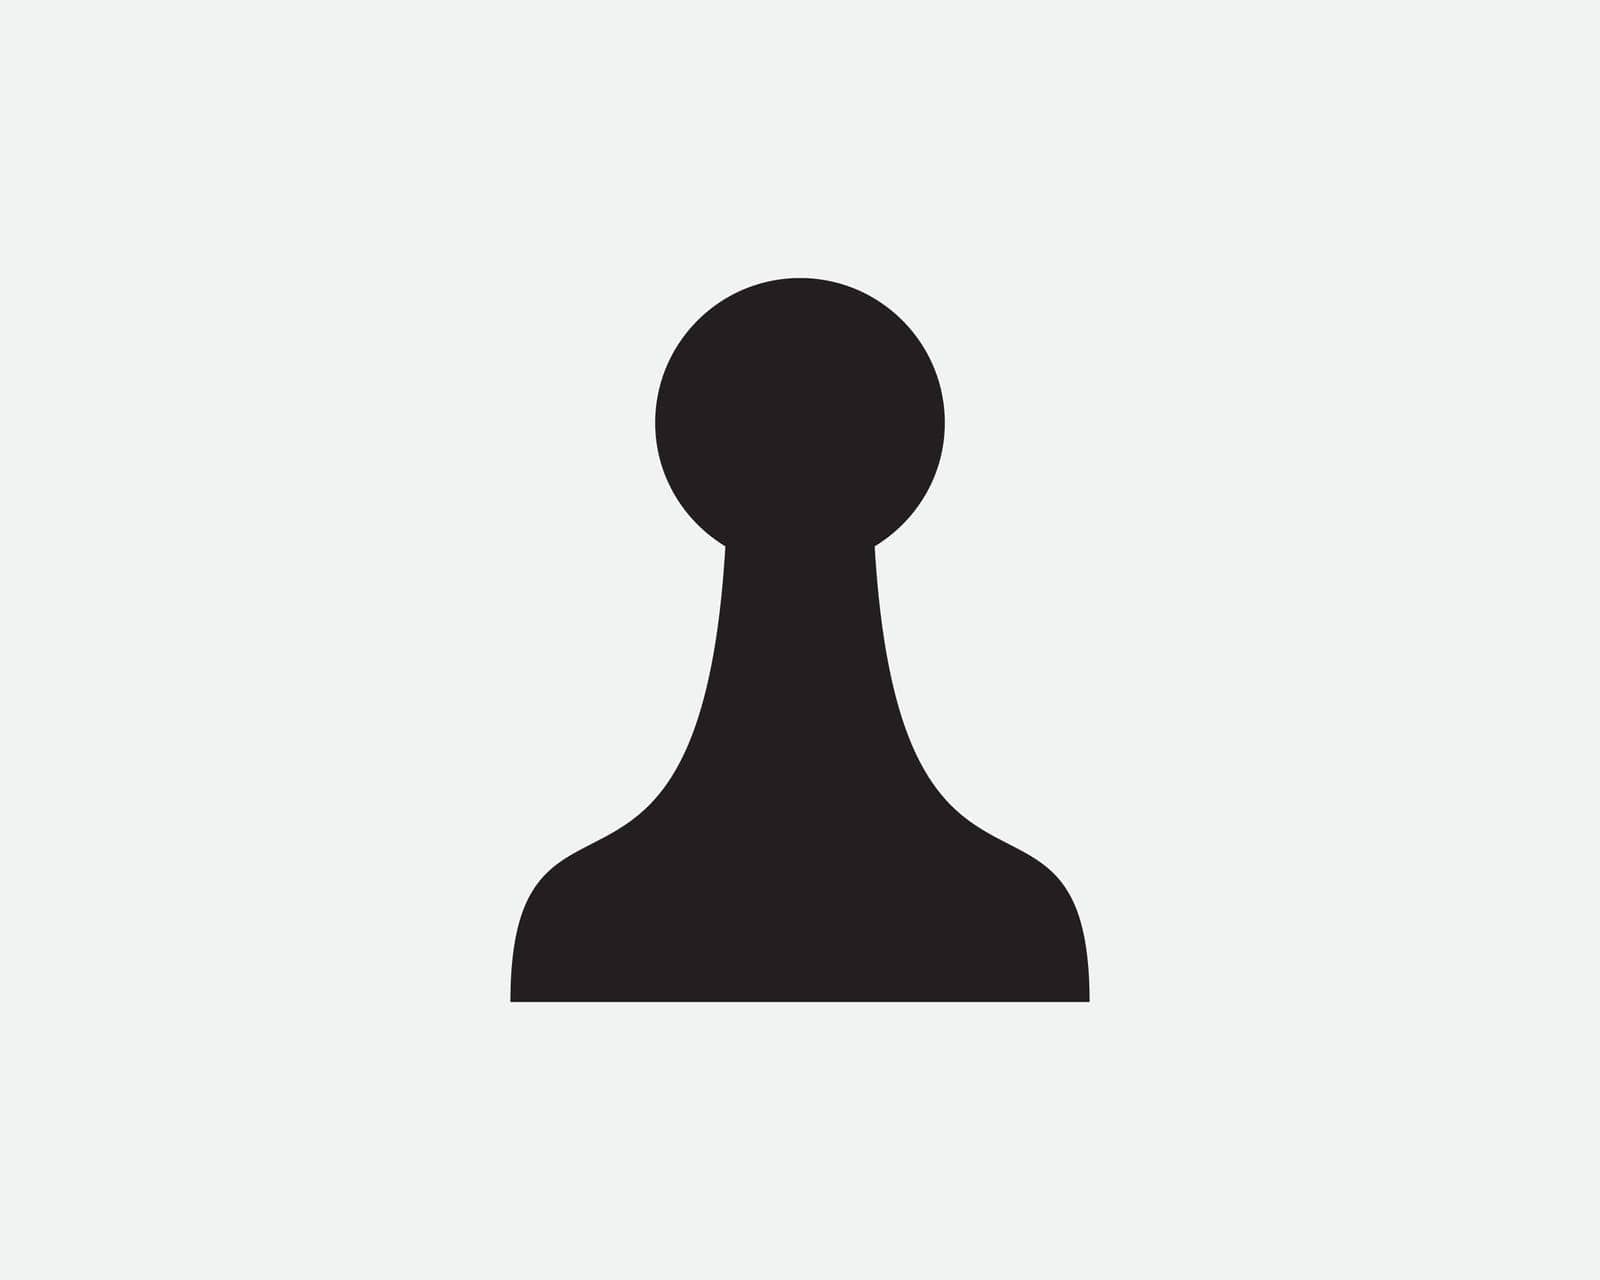 Pawn Chess Piece Icon by xileodesigns